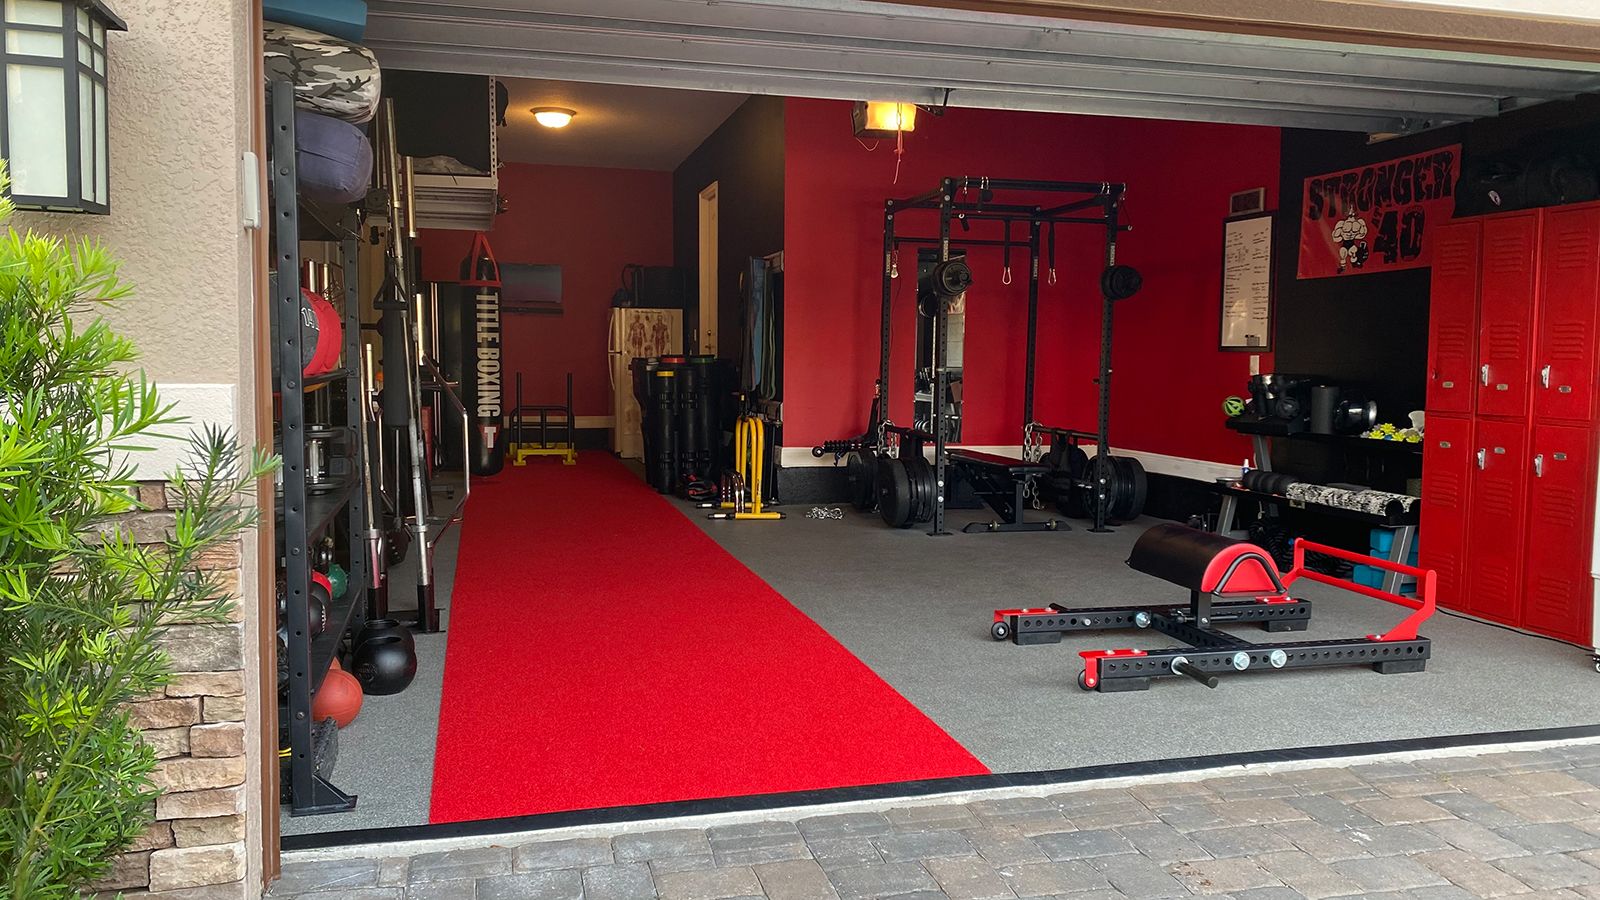 Set up a home gym space that works for you